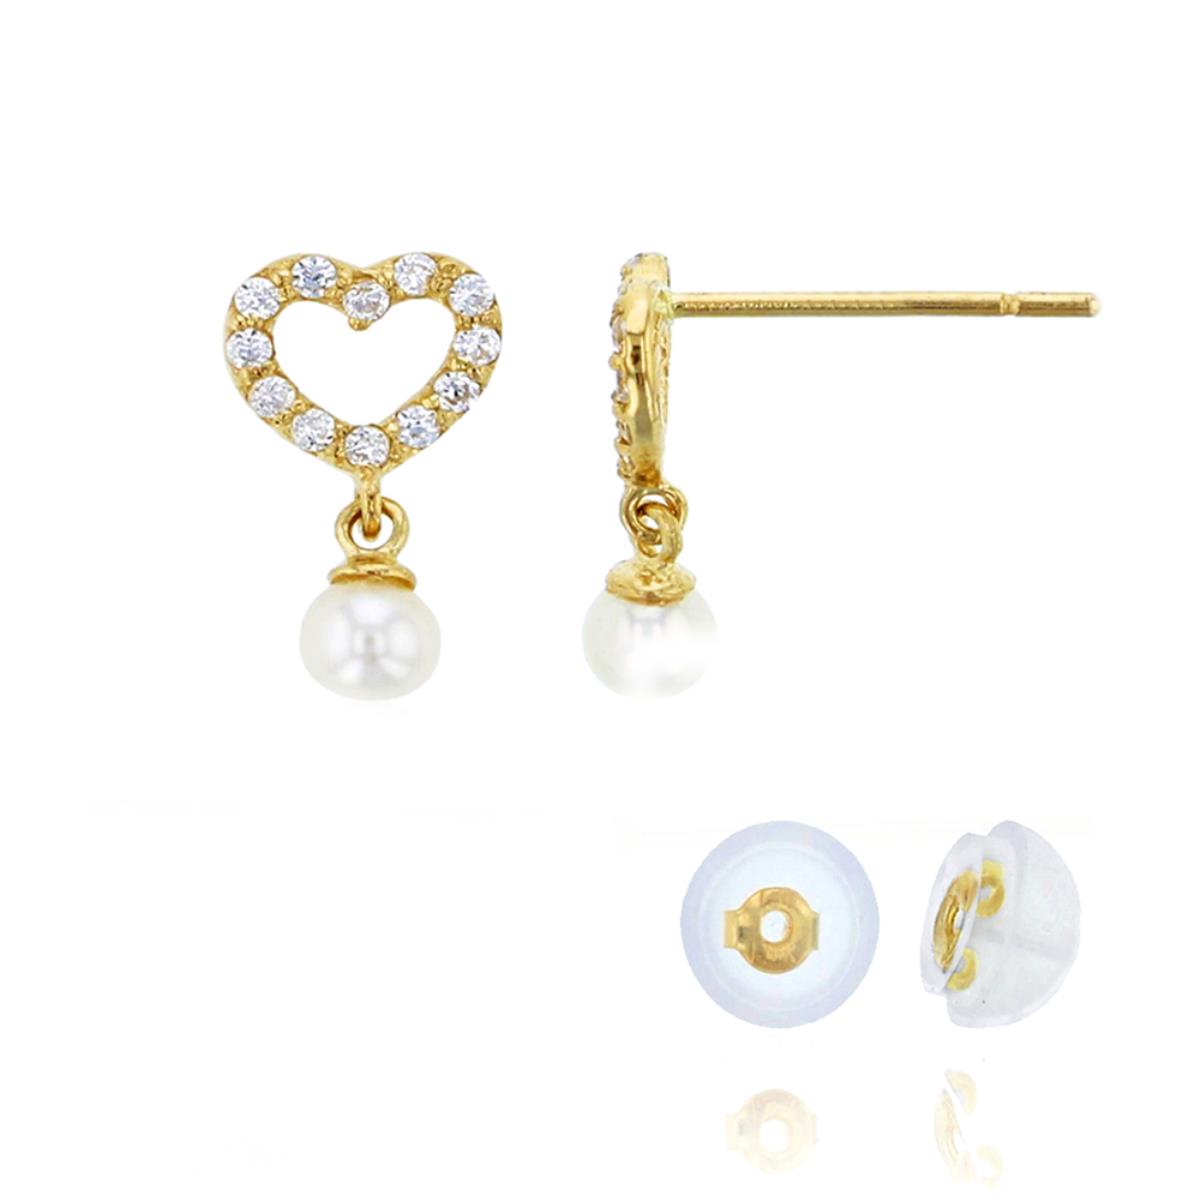 14K Yellow Gold Pave Created White Sapphire Open Heart with 3mm Fresh Water Pearl Drop Earring with 4.5mm Clutch